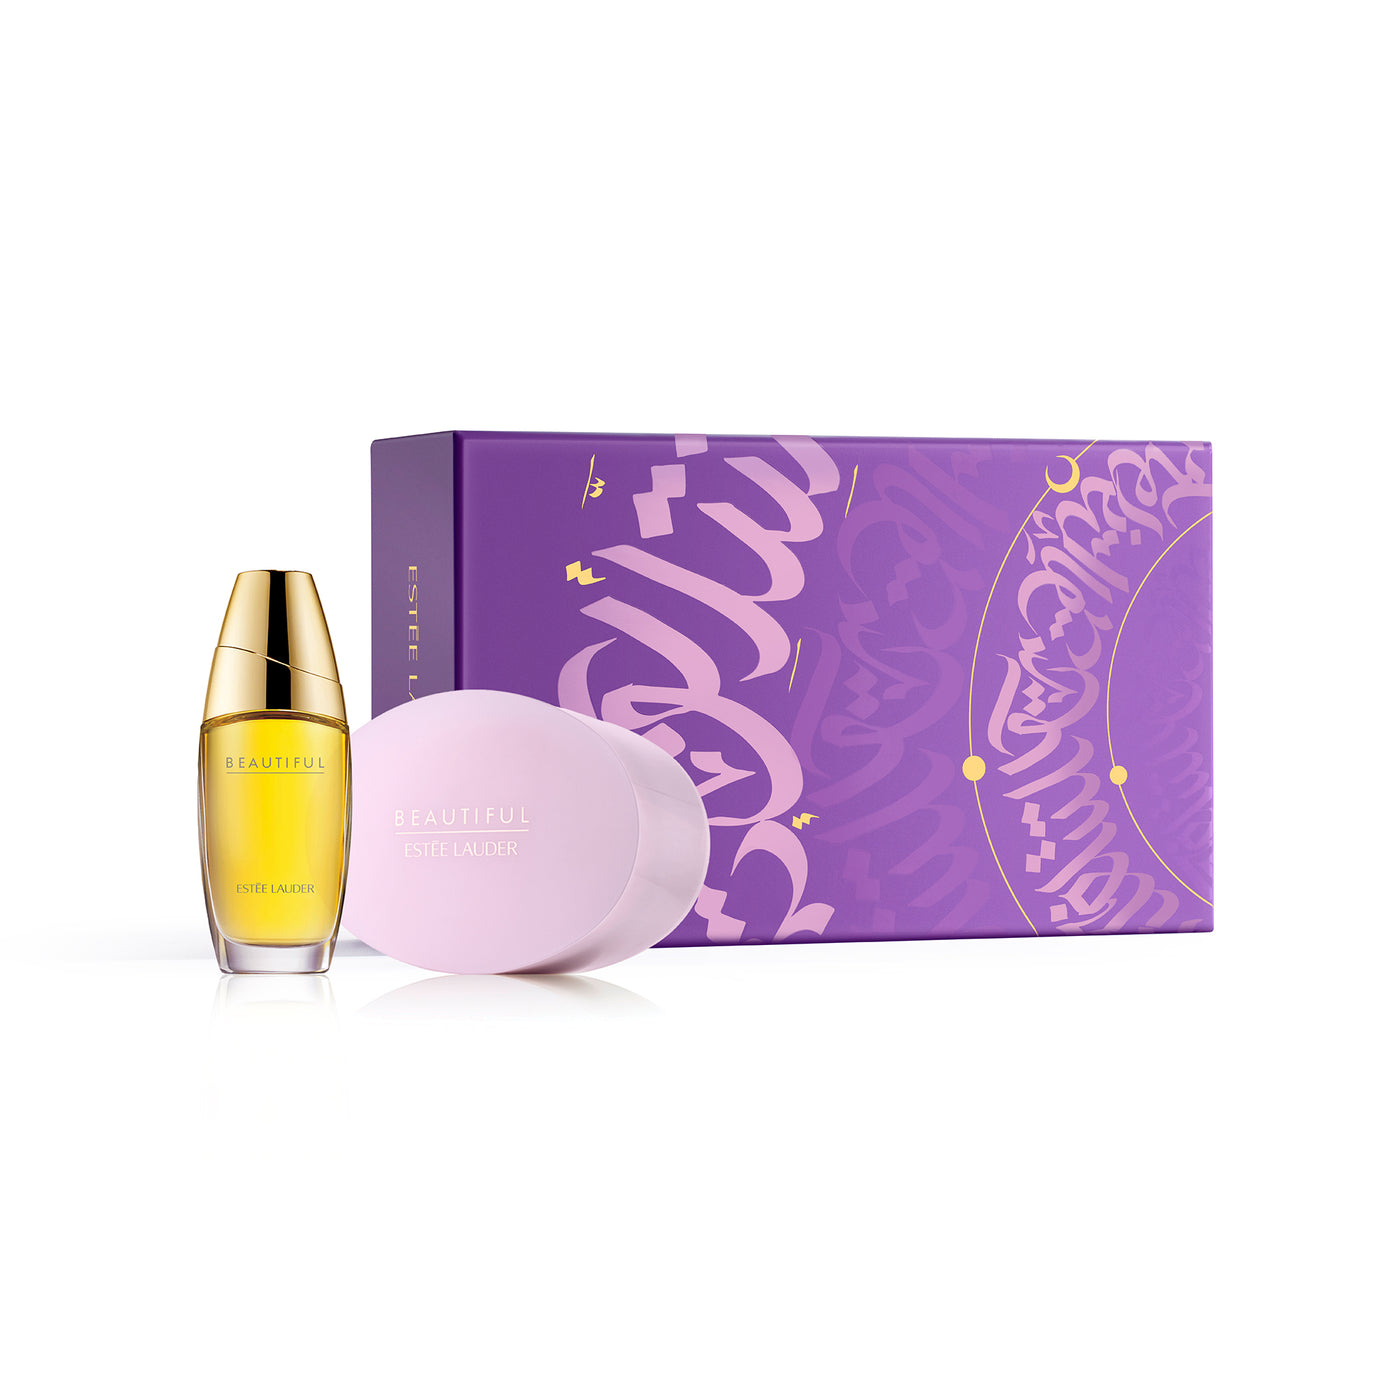 Shop The Latest Collection Of Estee Lauder Beautiful Routine In Lebanon